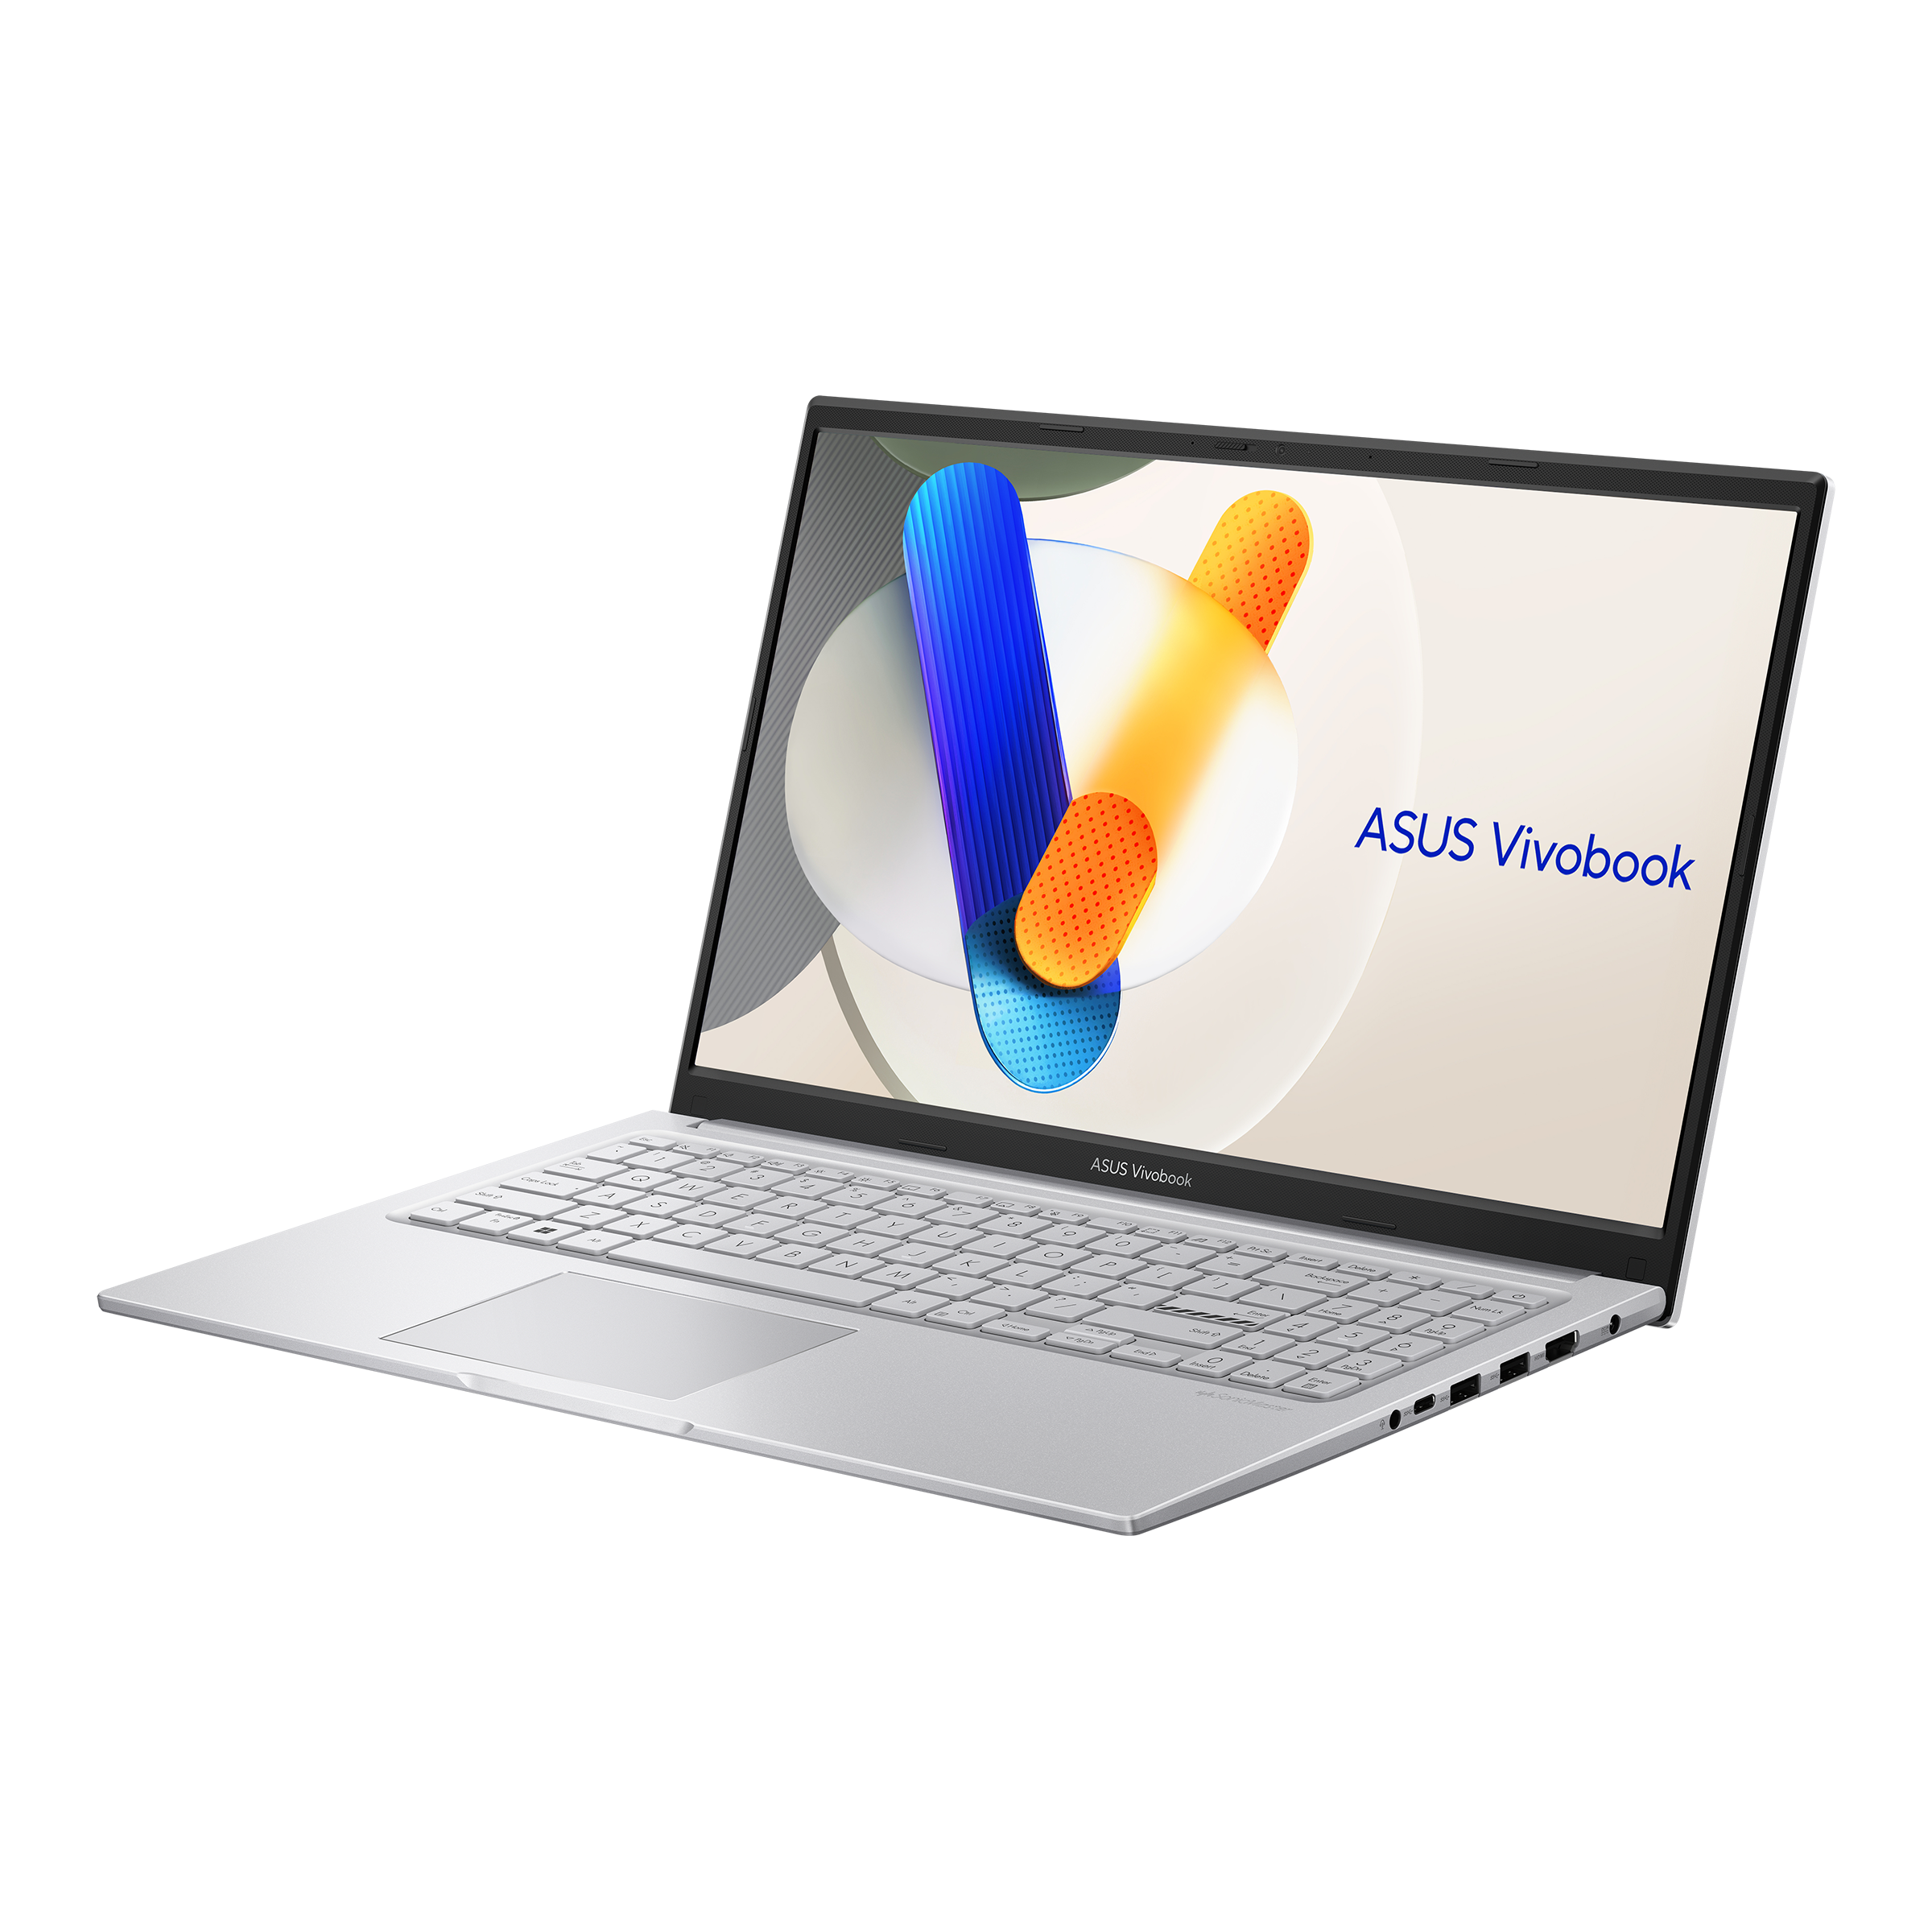 ASUS Vivobook 15X OLED (M3504)｜Laptops For Home｜ASUS Global